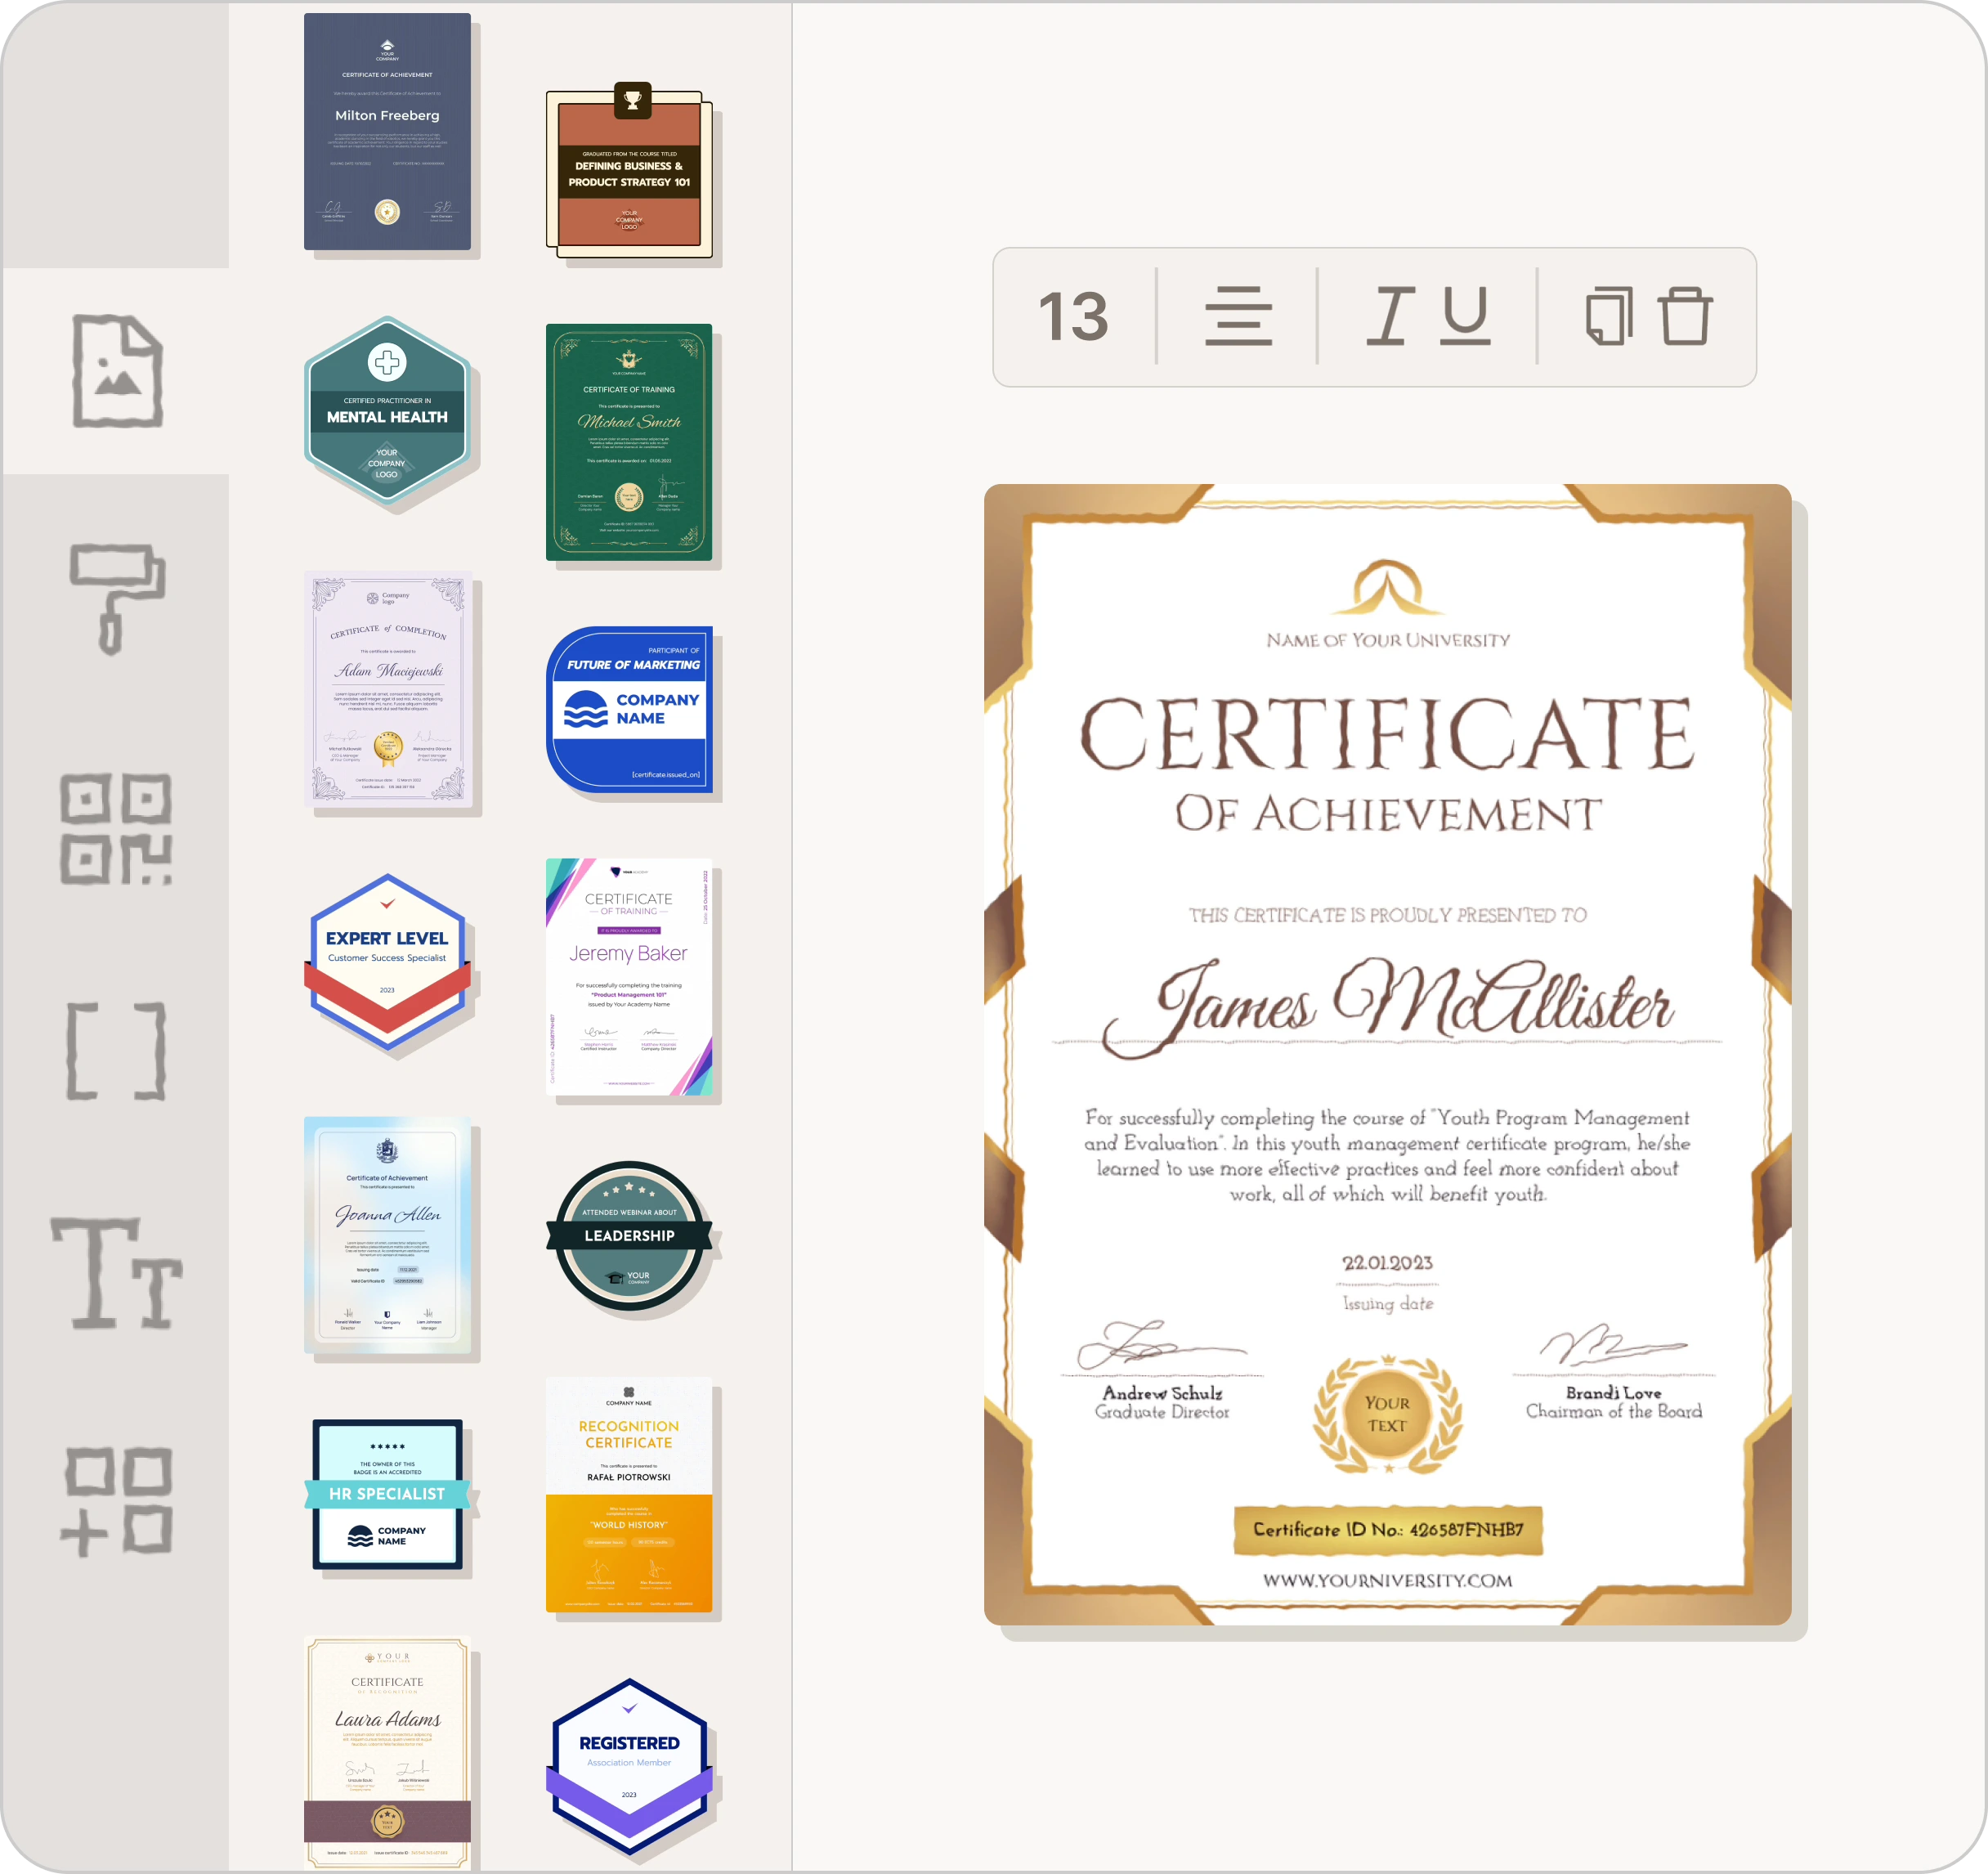 Create certificates easily with customizable templates